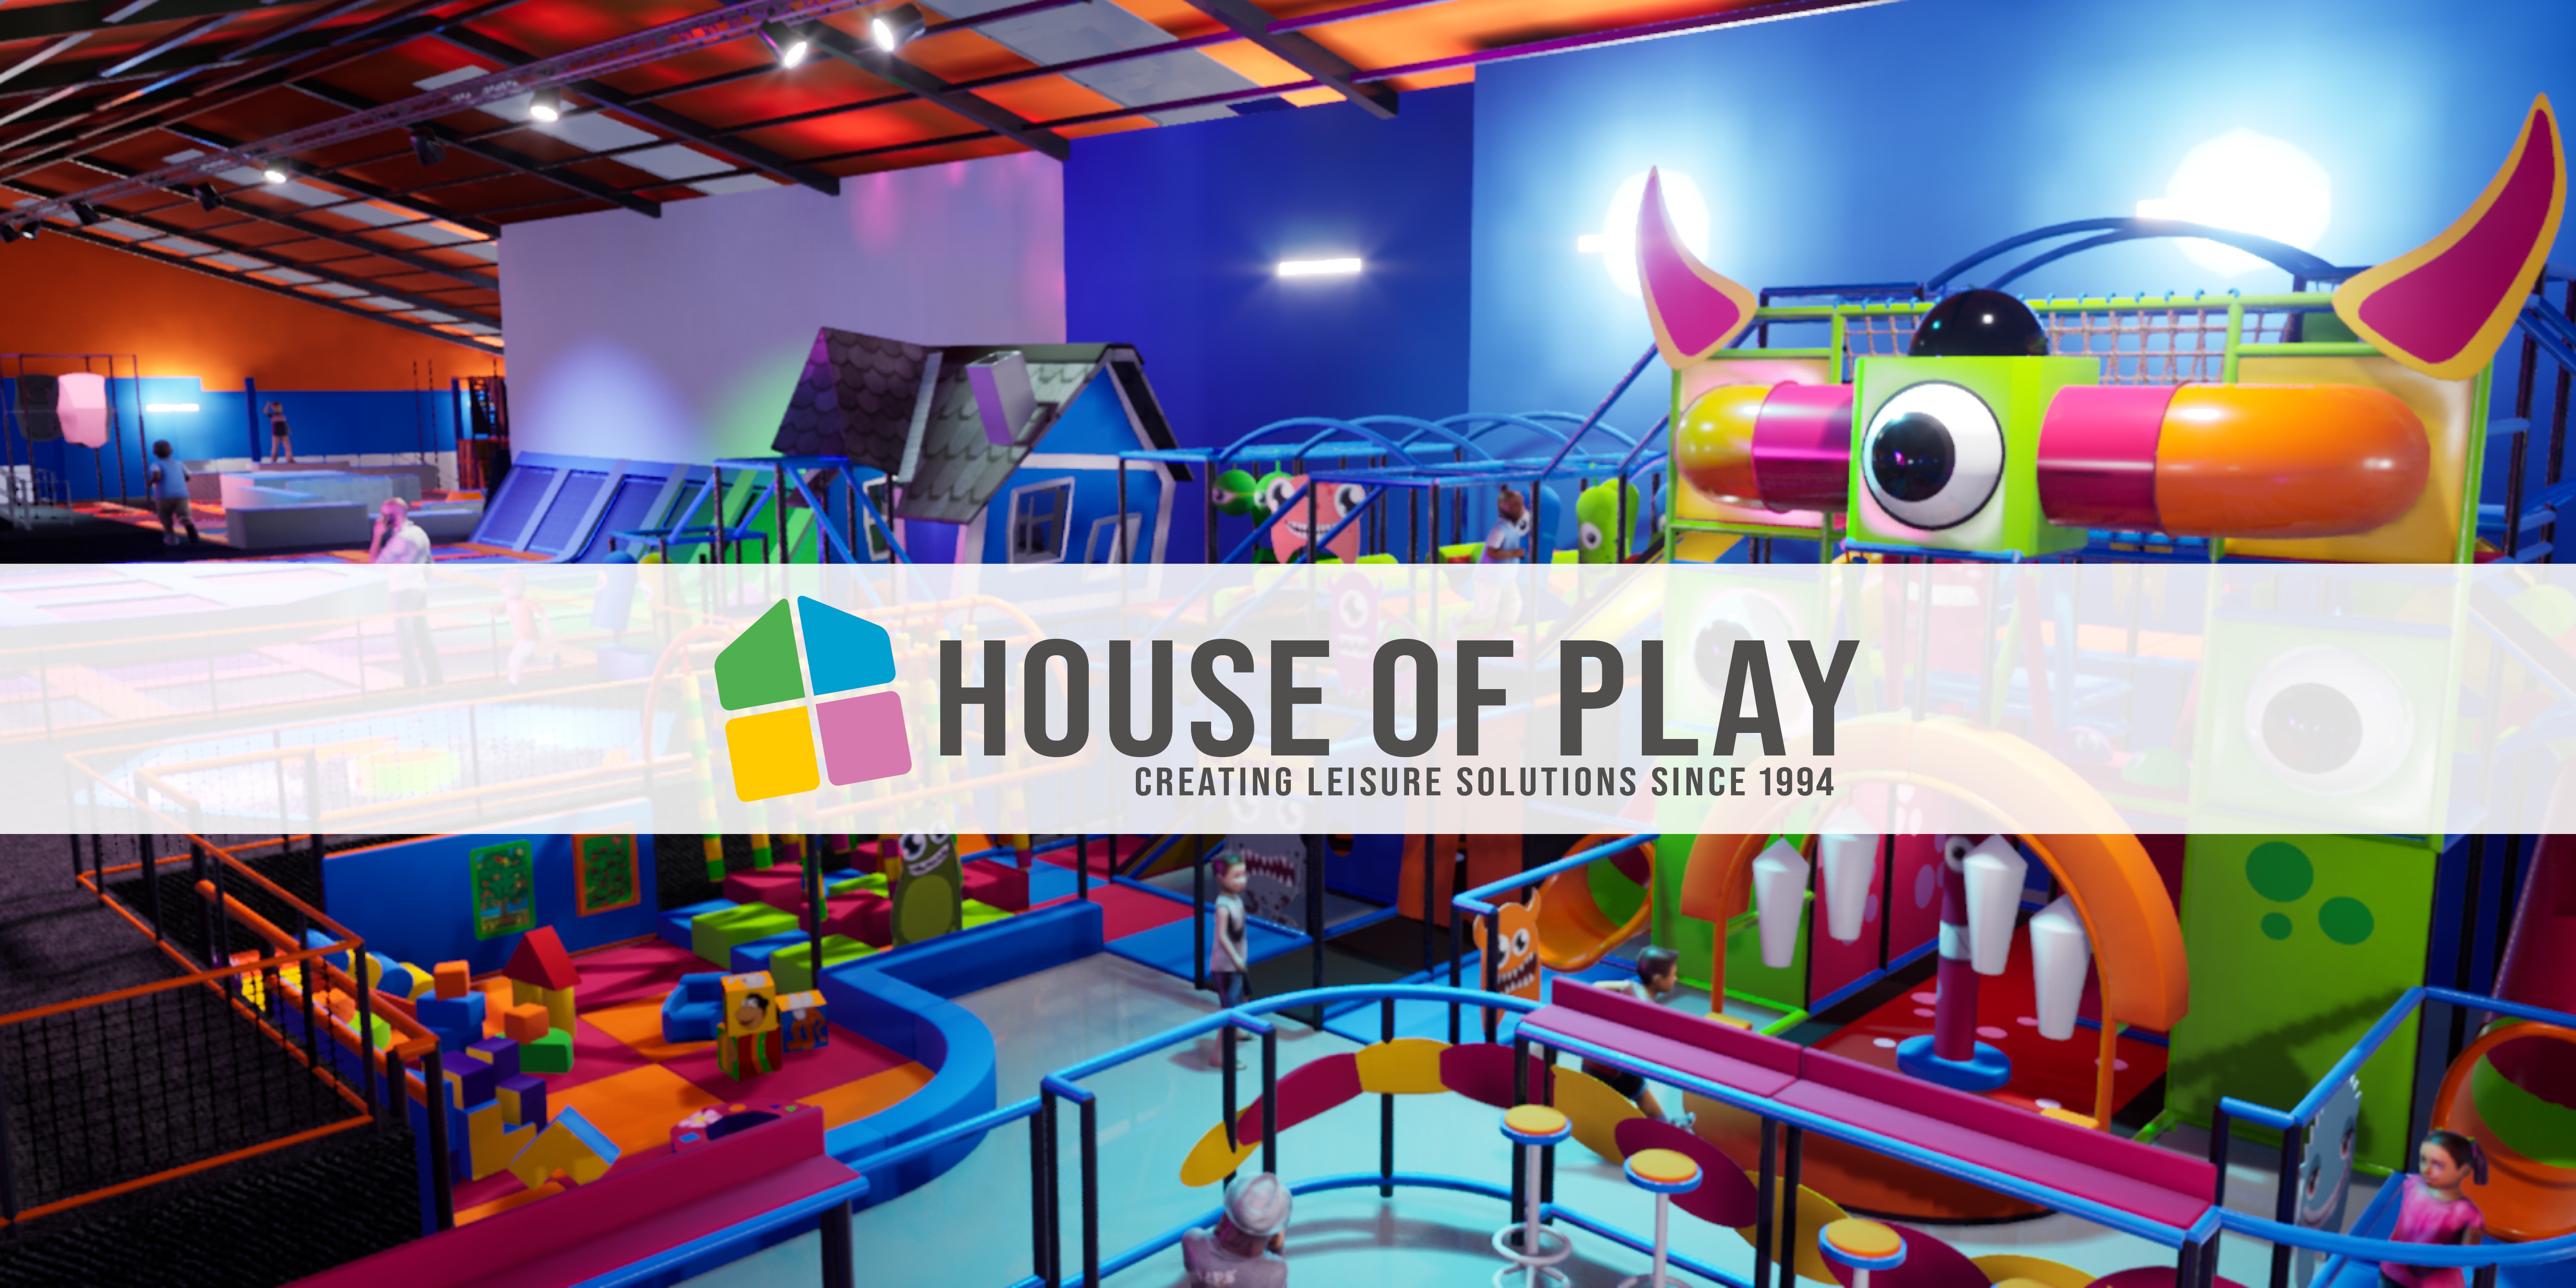 House of play